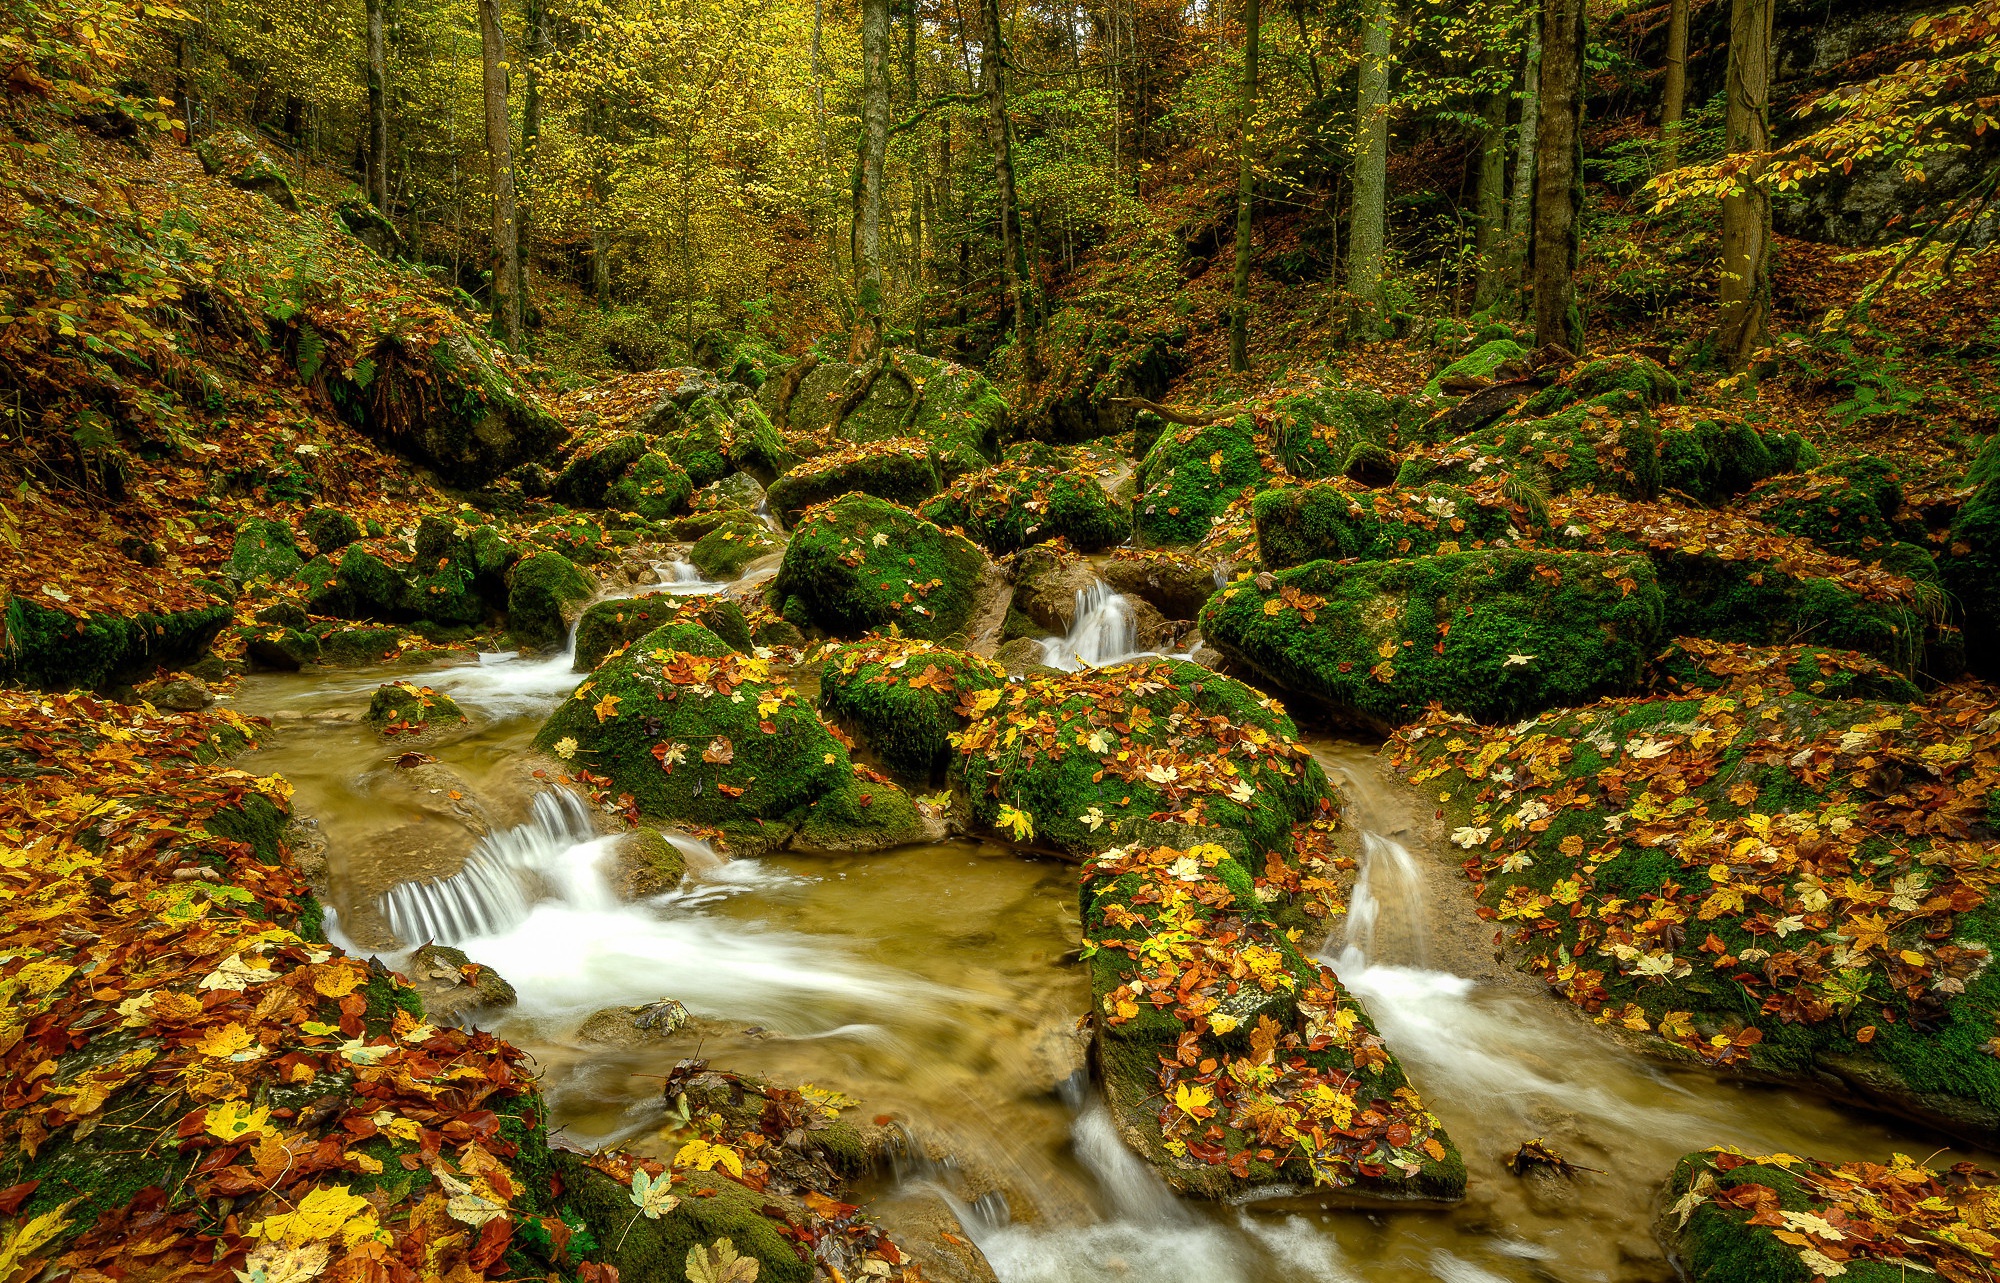 General 2000x1283 fall nature water forest outdoors plants leaves